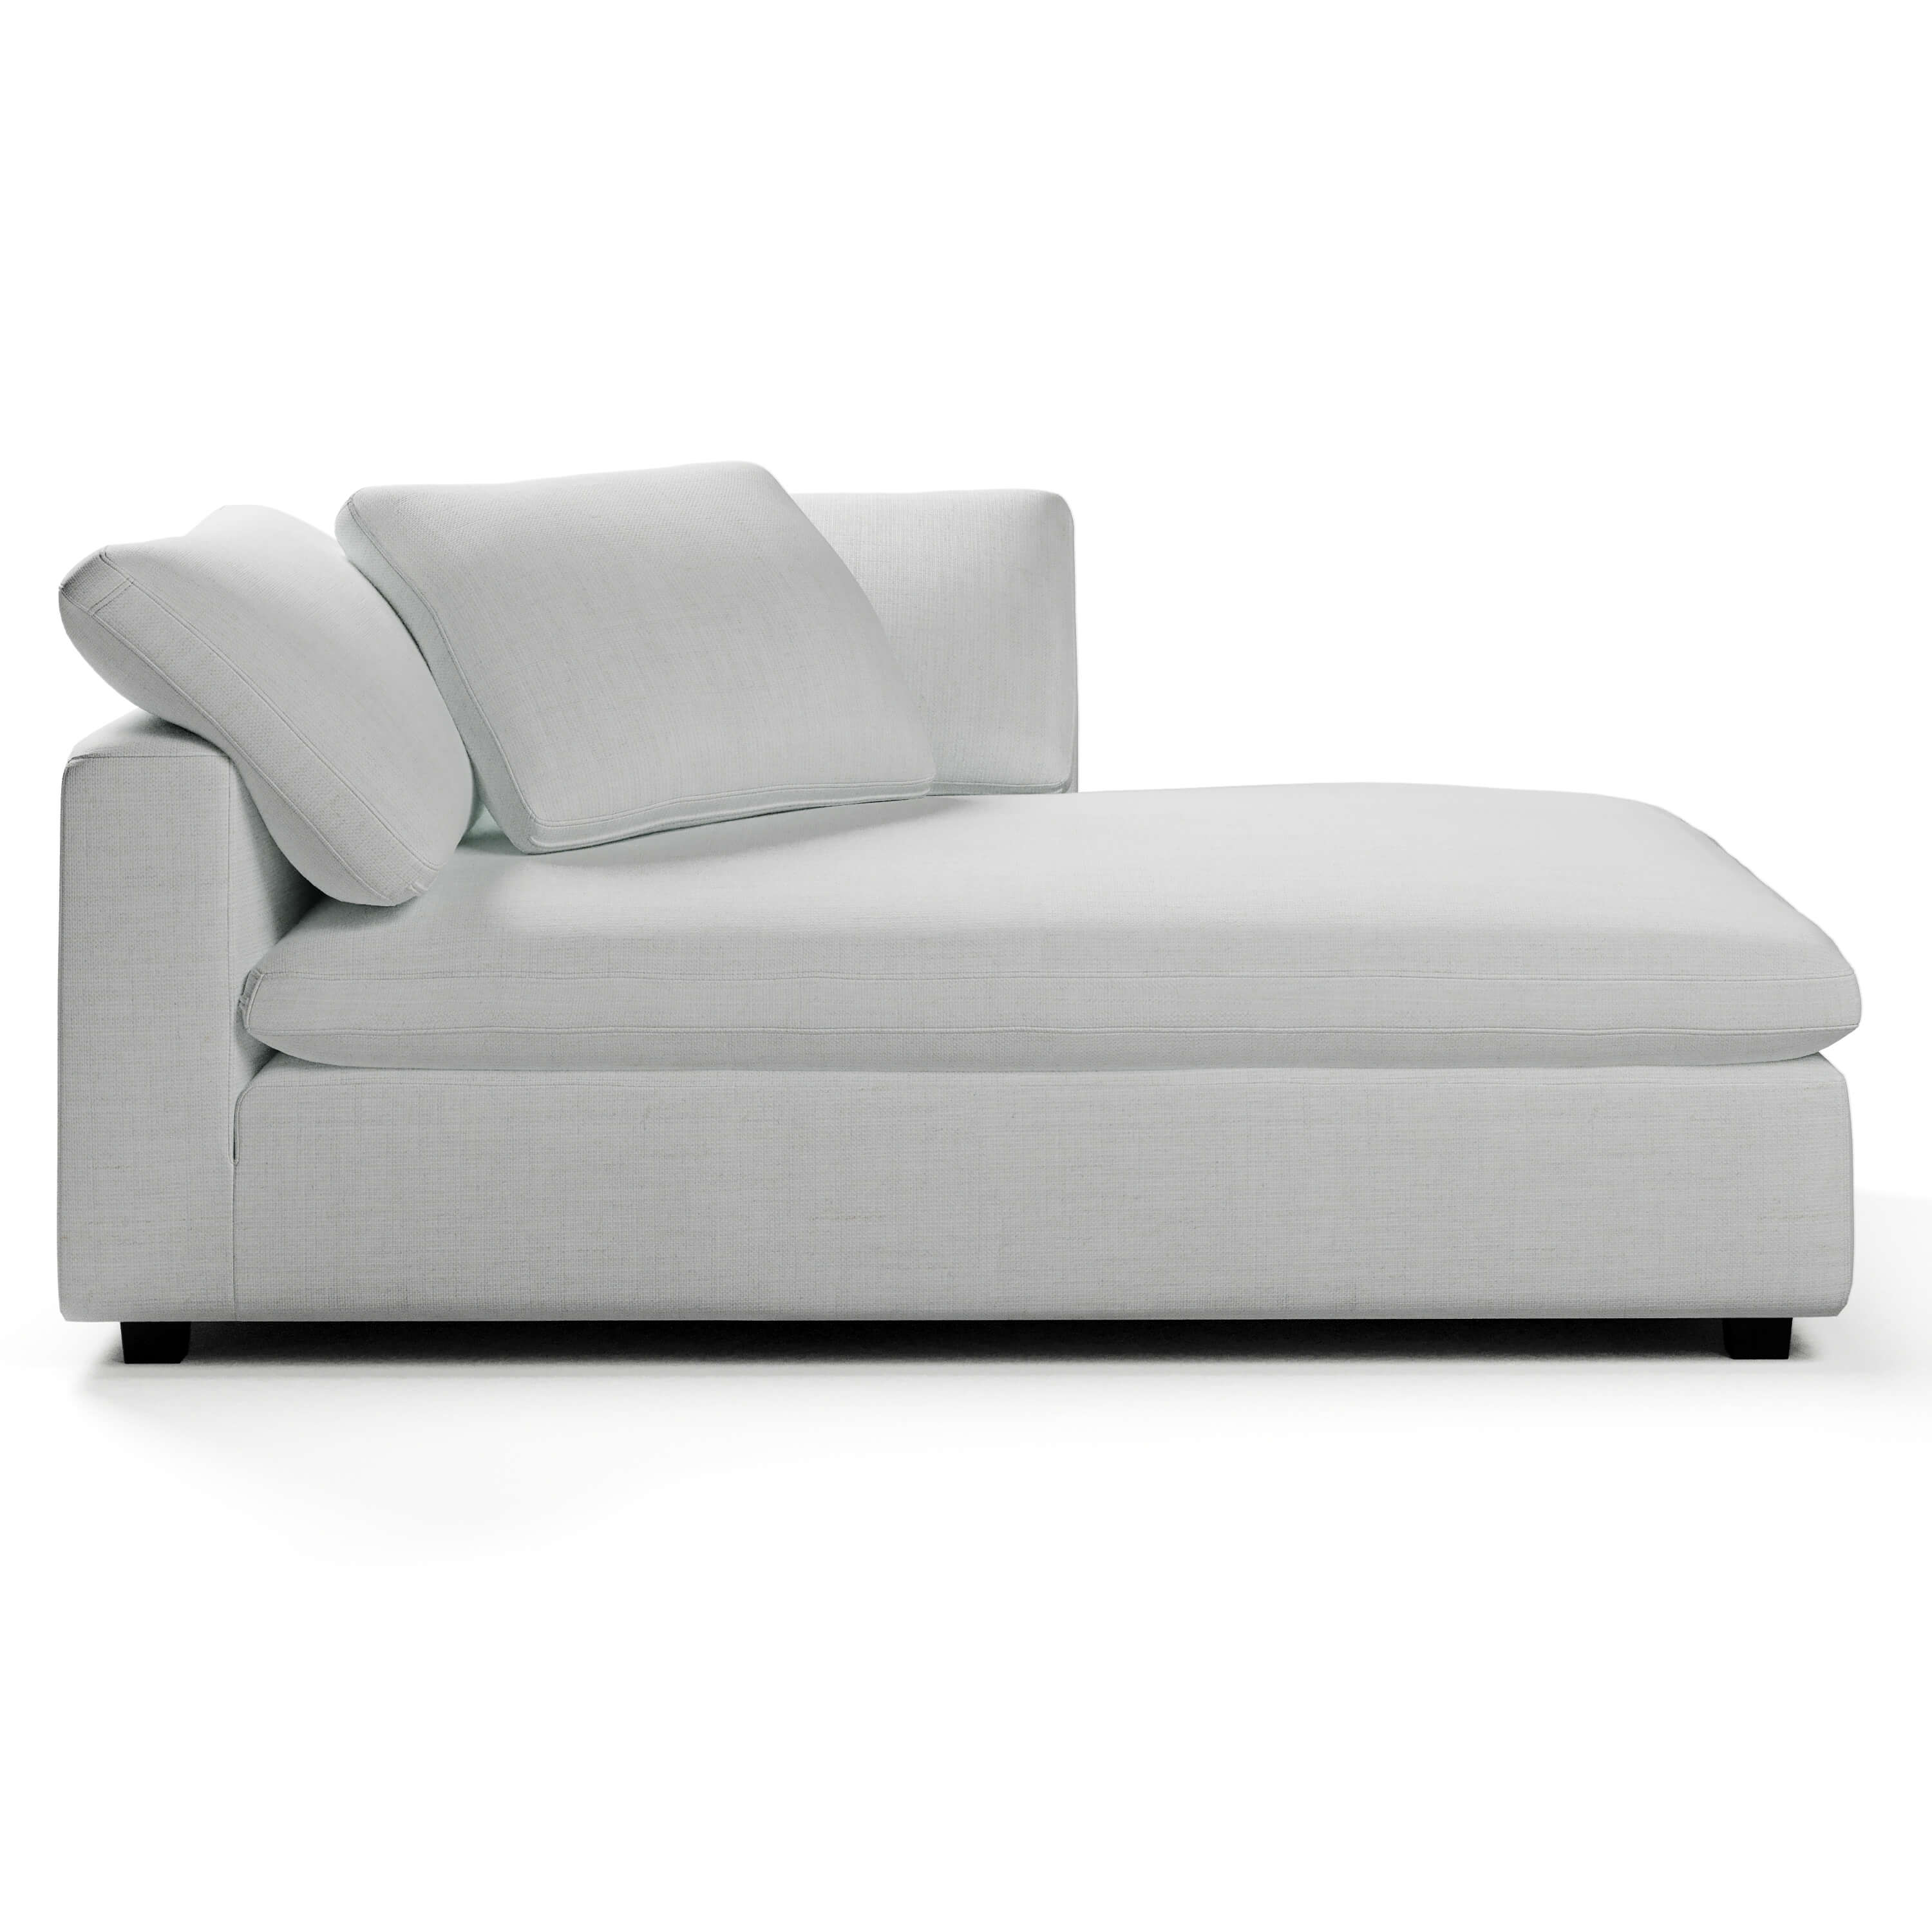 Right Arm Chaise Lounge | Long Chaise Lounge | Couch Haus